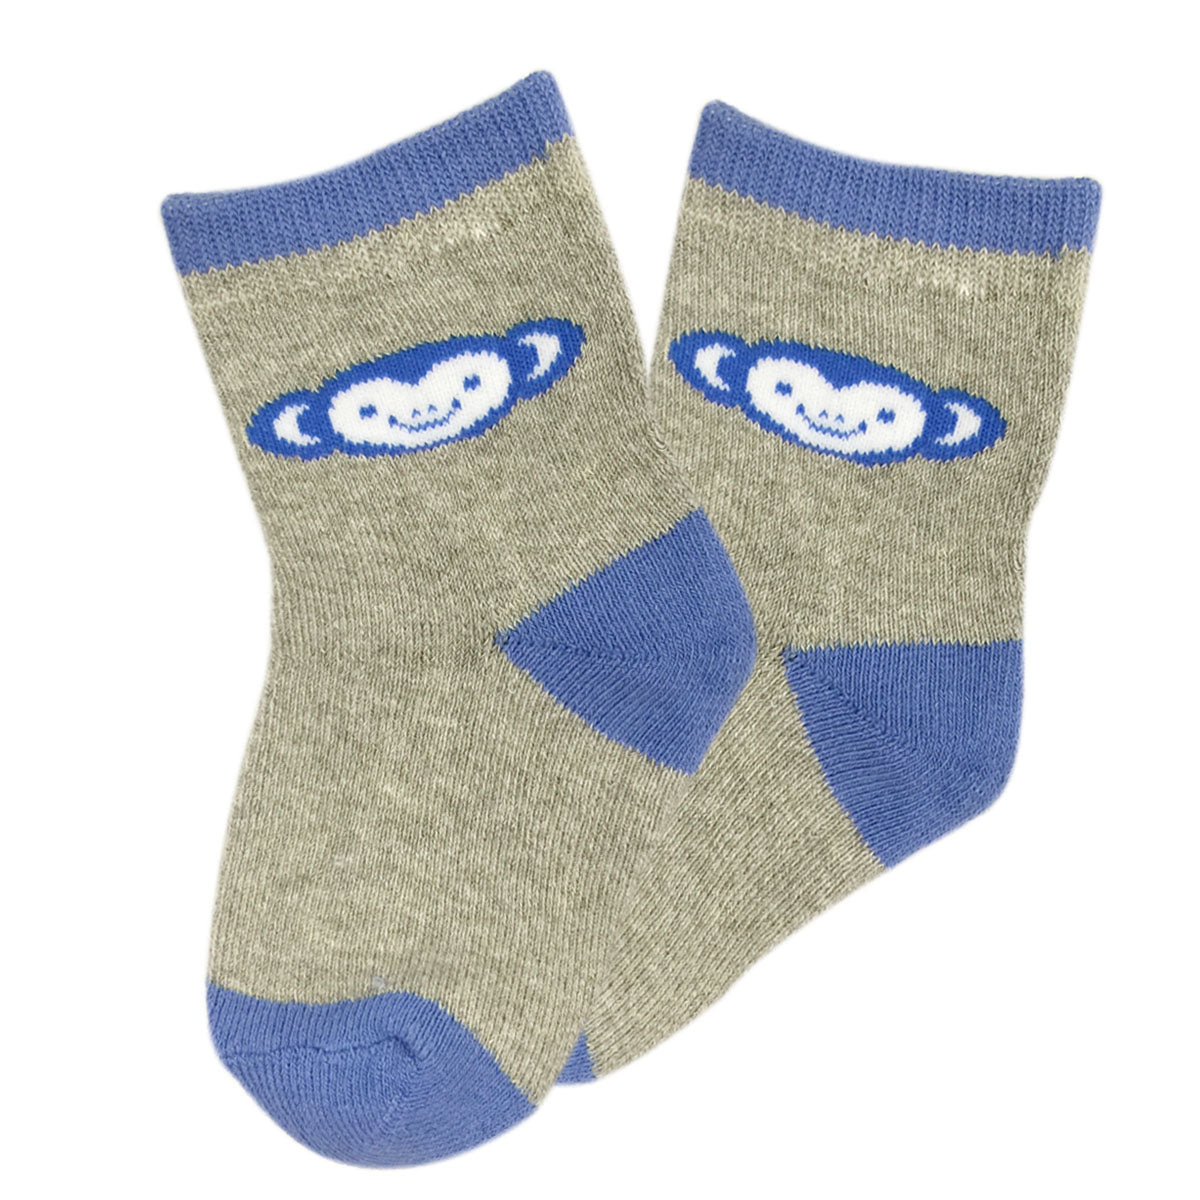 Wrapables Toddler's Casual Ankle Socks (Set of 6)